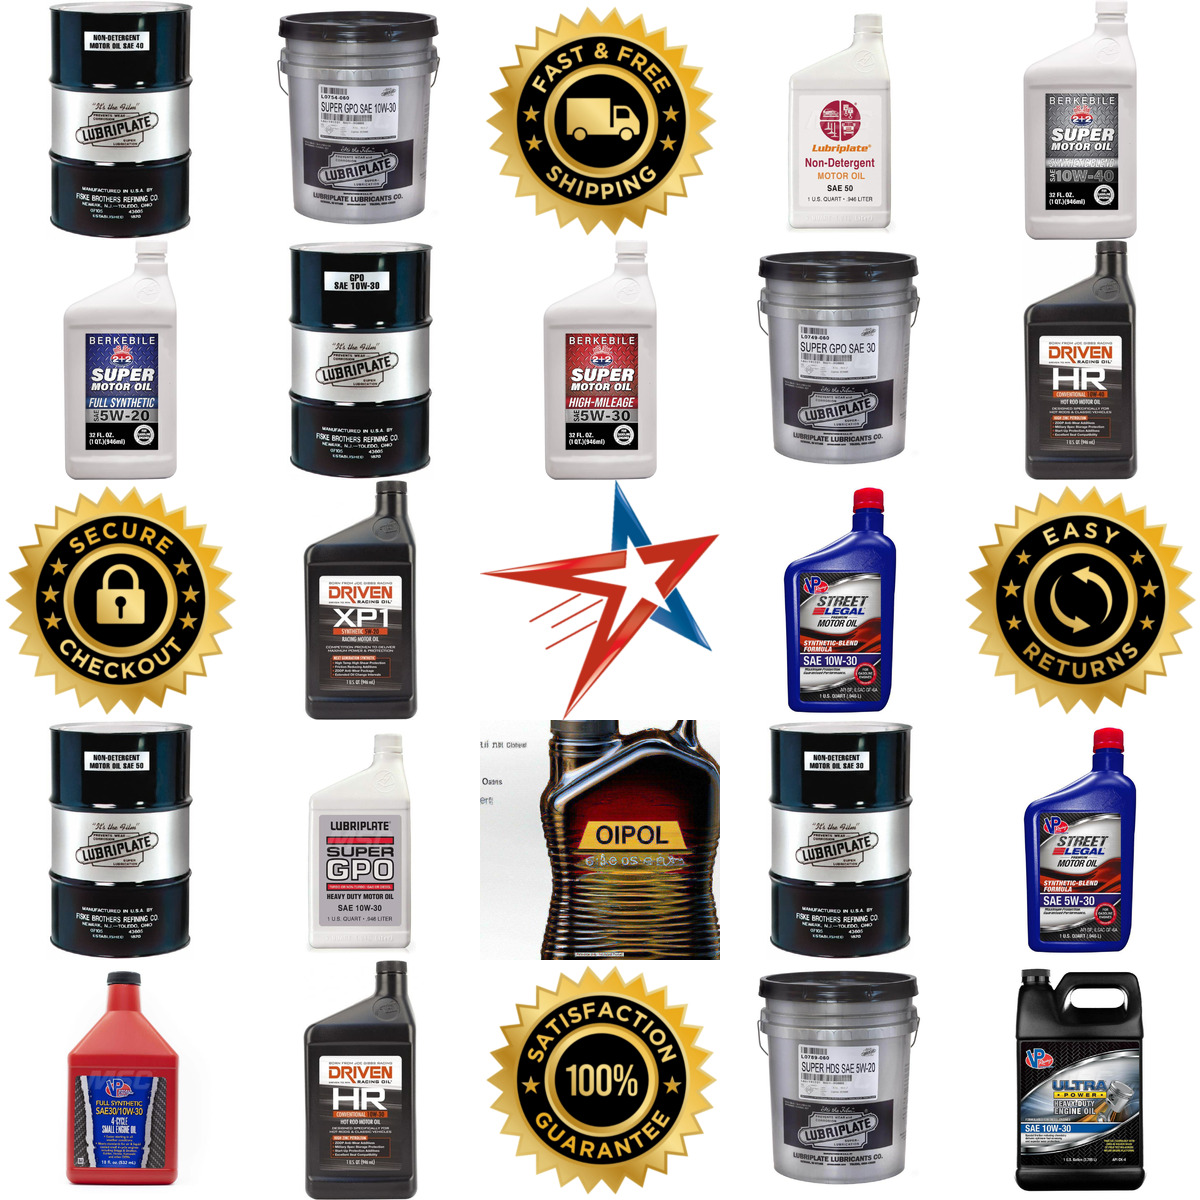 A selection of Motor Oil products on GoVets